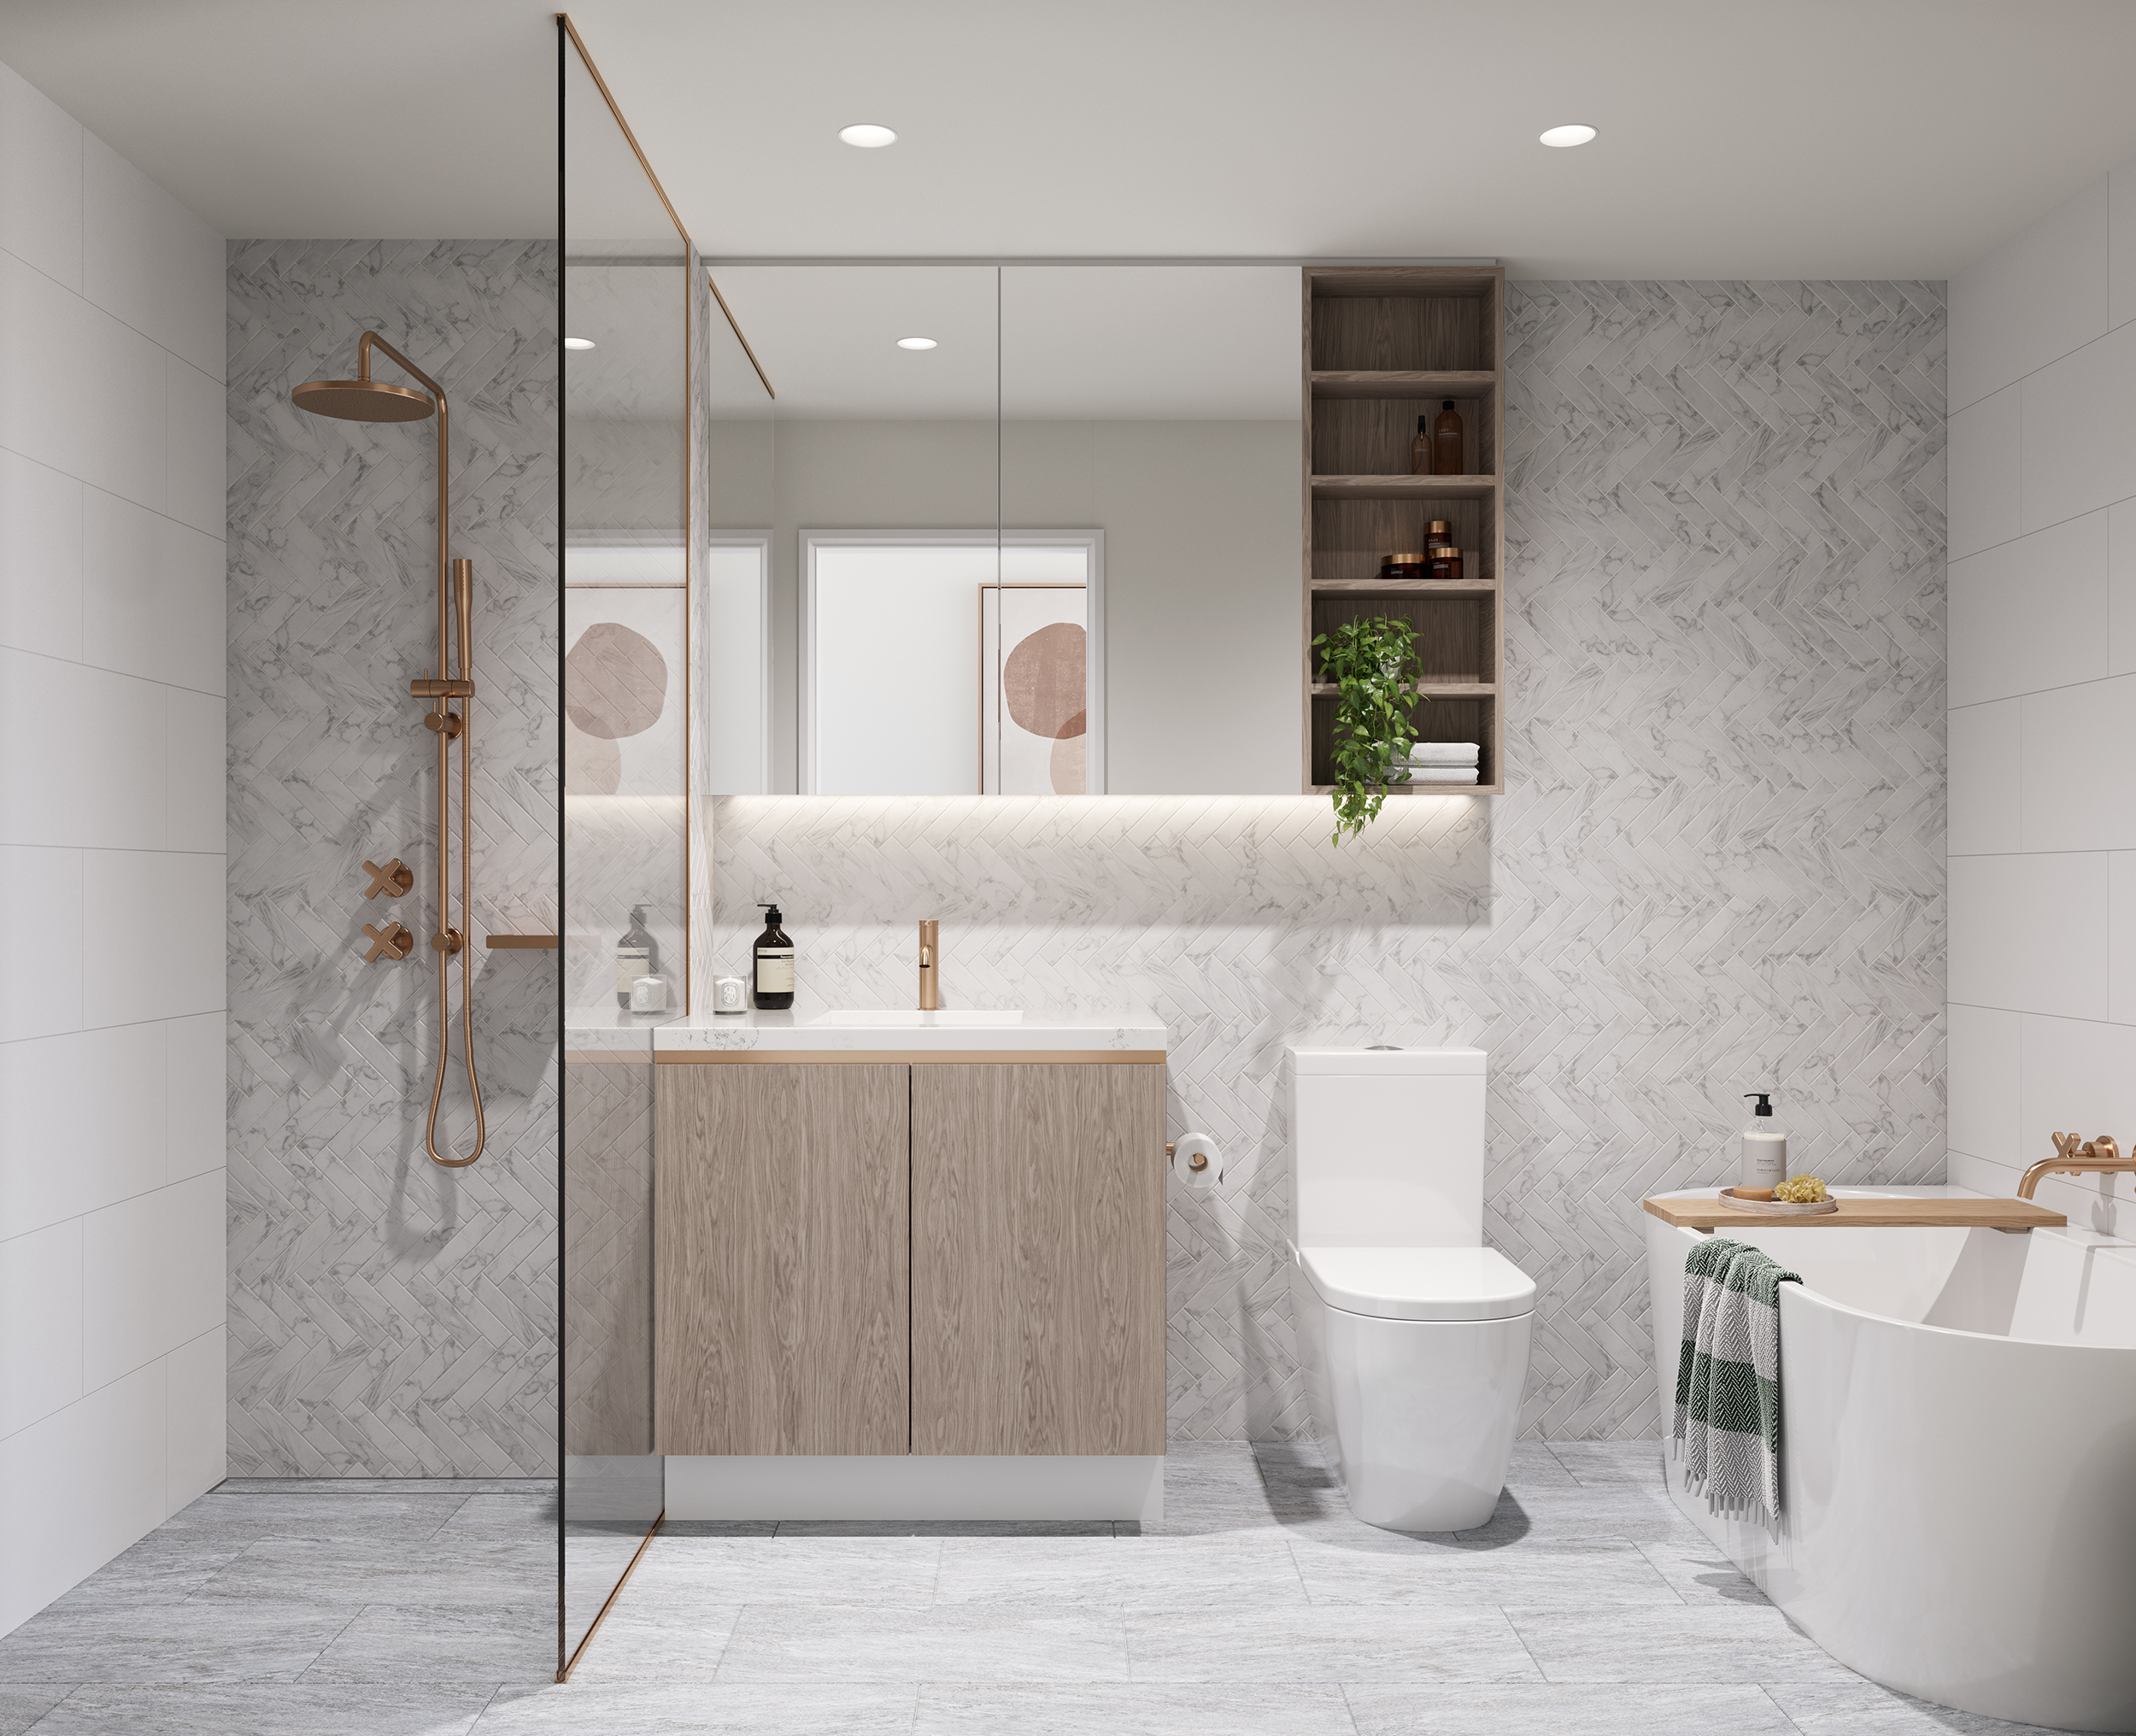 Inviting bathroom in a residential apartment, featuring white tile floors and herringbone-patterned tiles on the walls. The color scheme incorporates white tiles, copper metal accents, and natural timber finishes on the joinery.